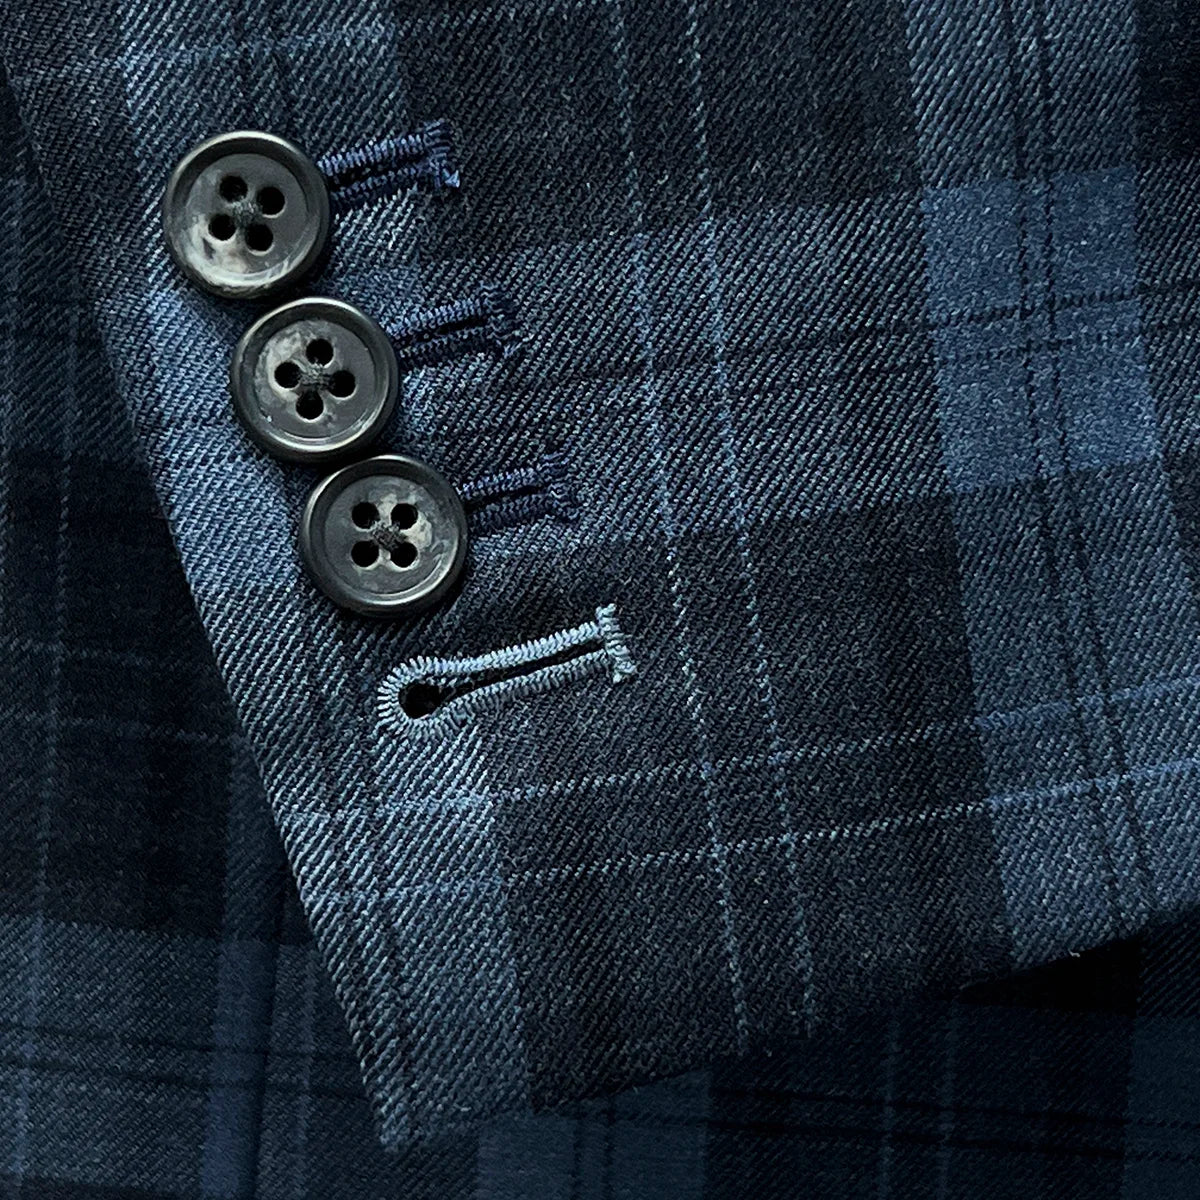 Functional sleeve buttonholes on a Prussian Blue sportcoat with black grid checks.